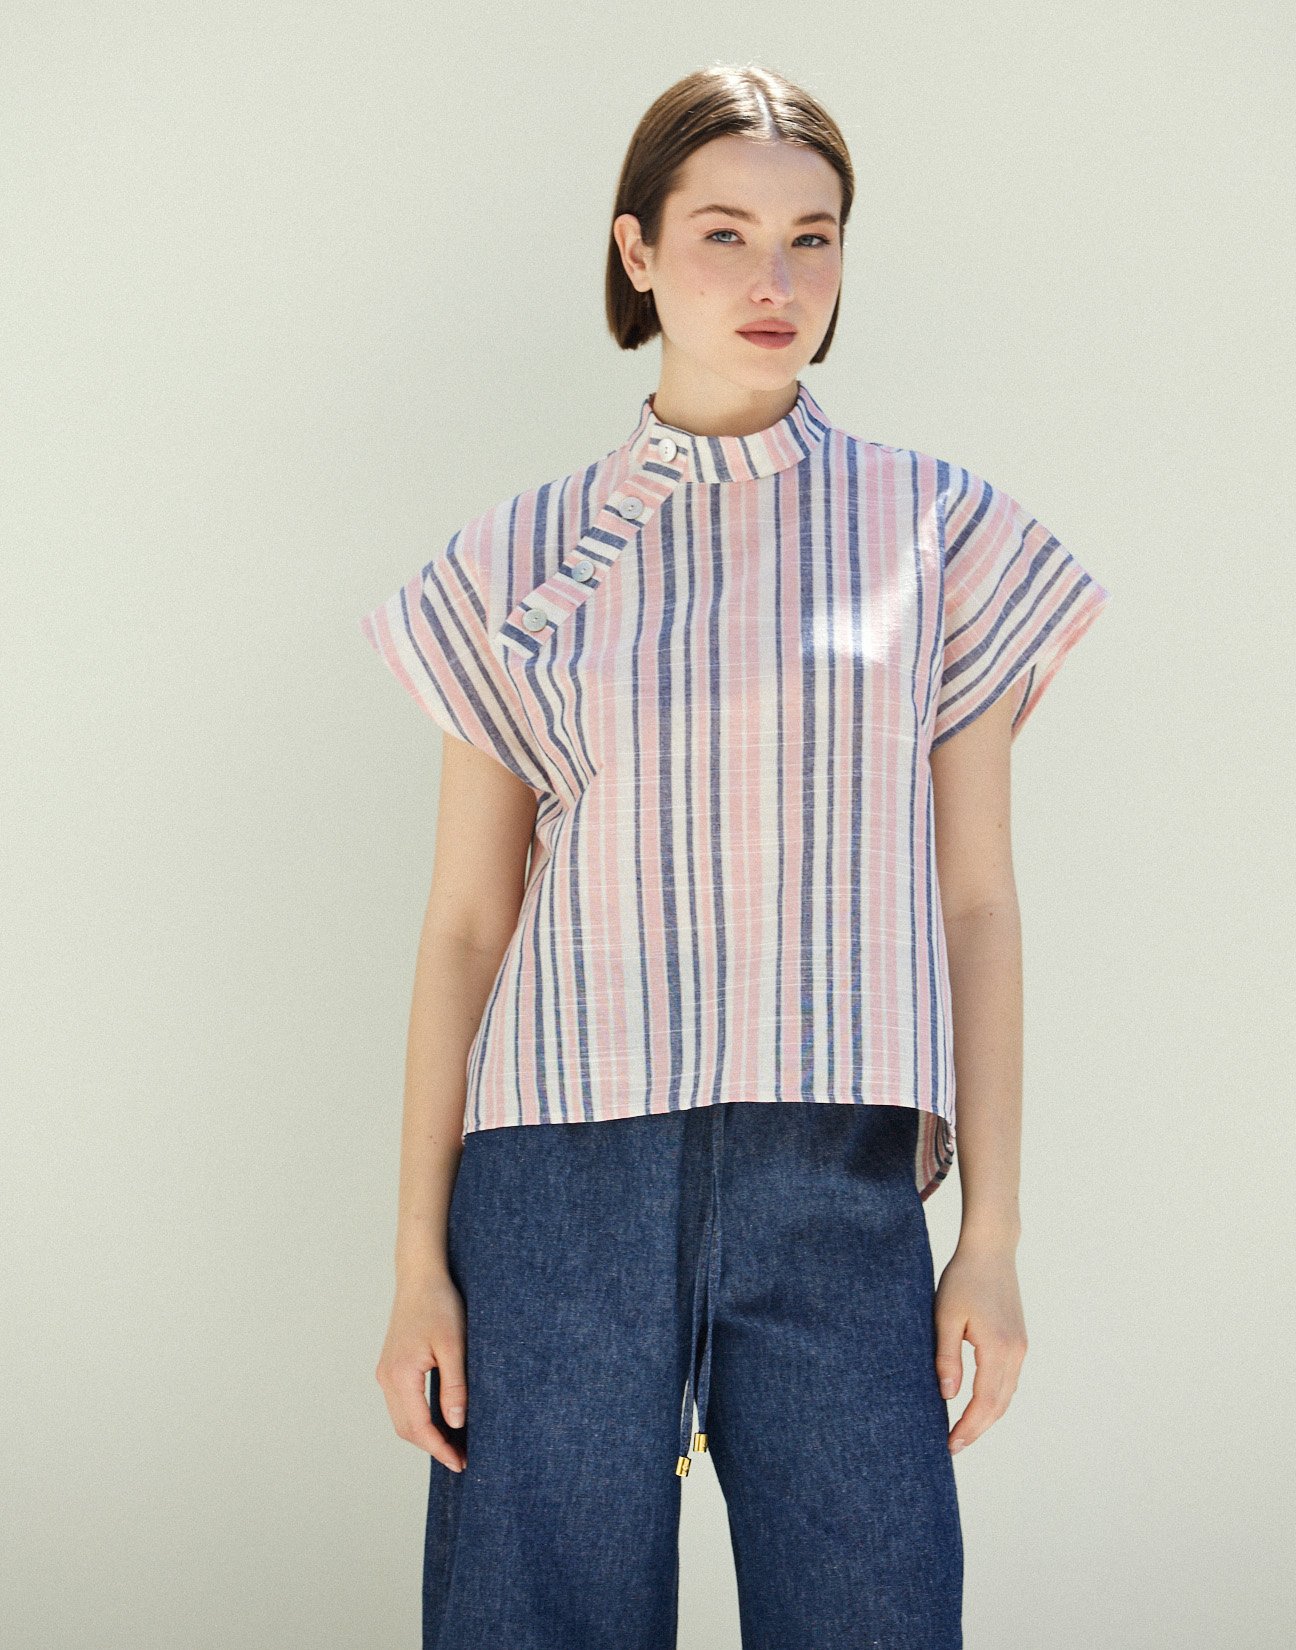 Striped top with buttons